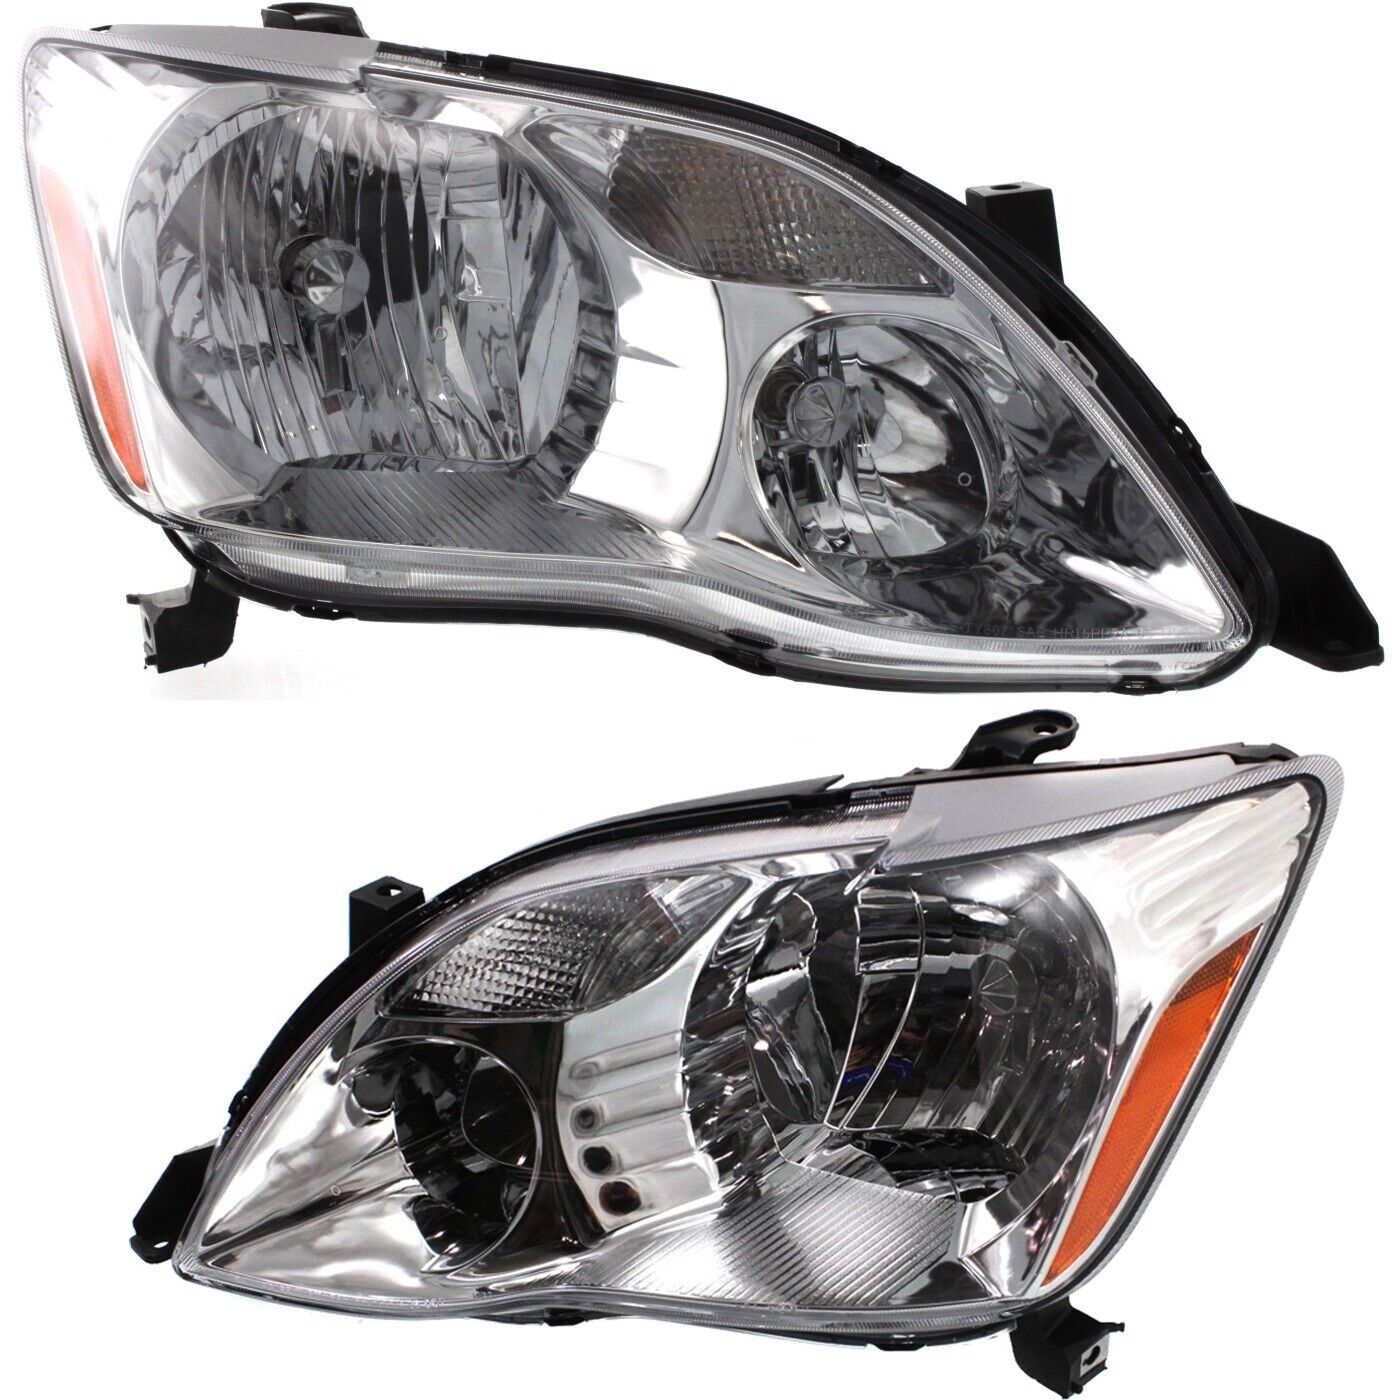 Headlight Assembly Set For 2005 2006 2007 Toyota Avalon Left and Right With Bulb